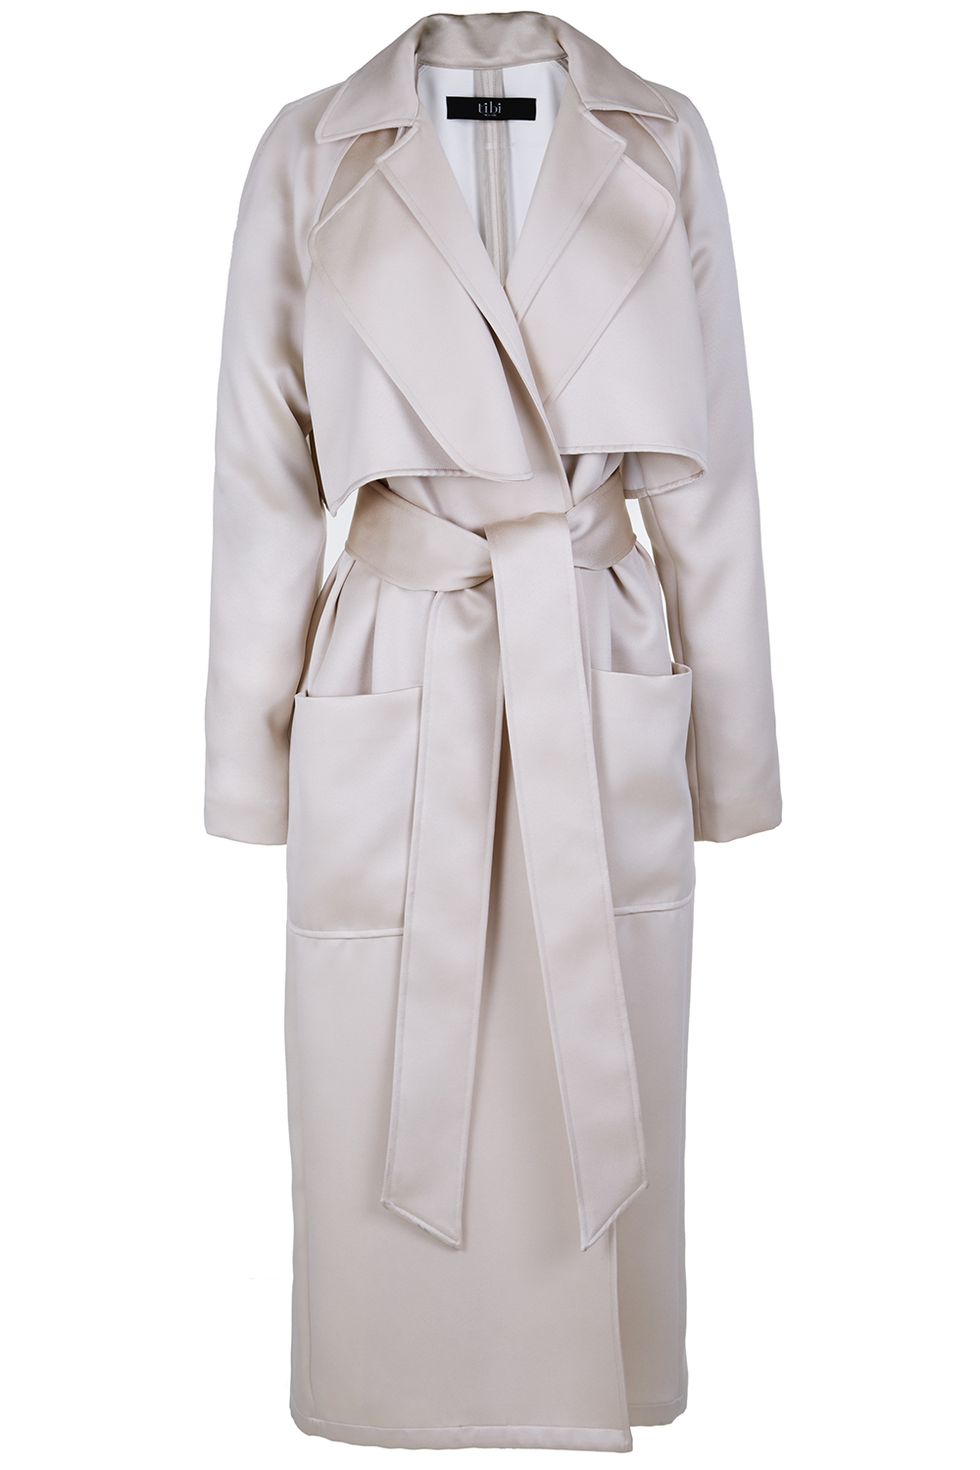 <p>Tibi satin trench, $895, <a href="http://www.tibi.com/shop/outerwear/double-face-satin-soft-trench-coat" target="_blank">tibi.com</a>.</p>